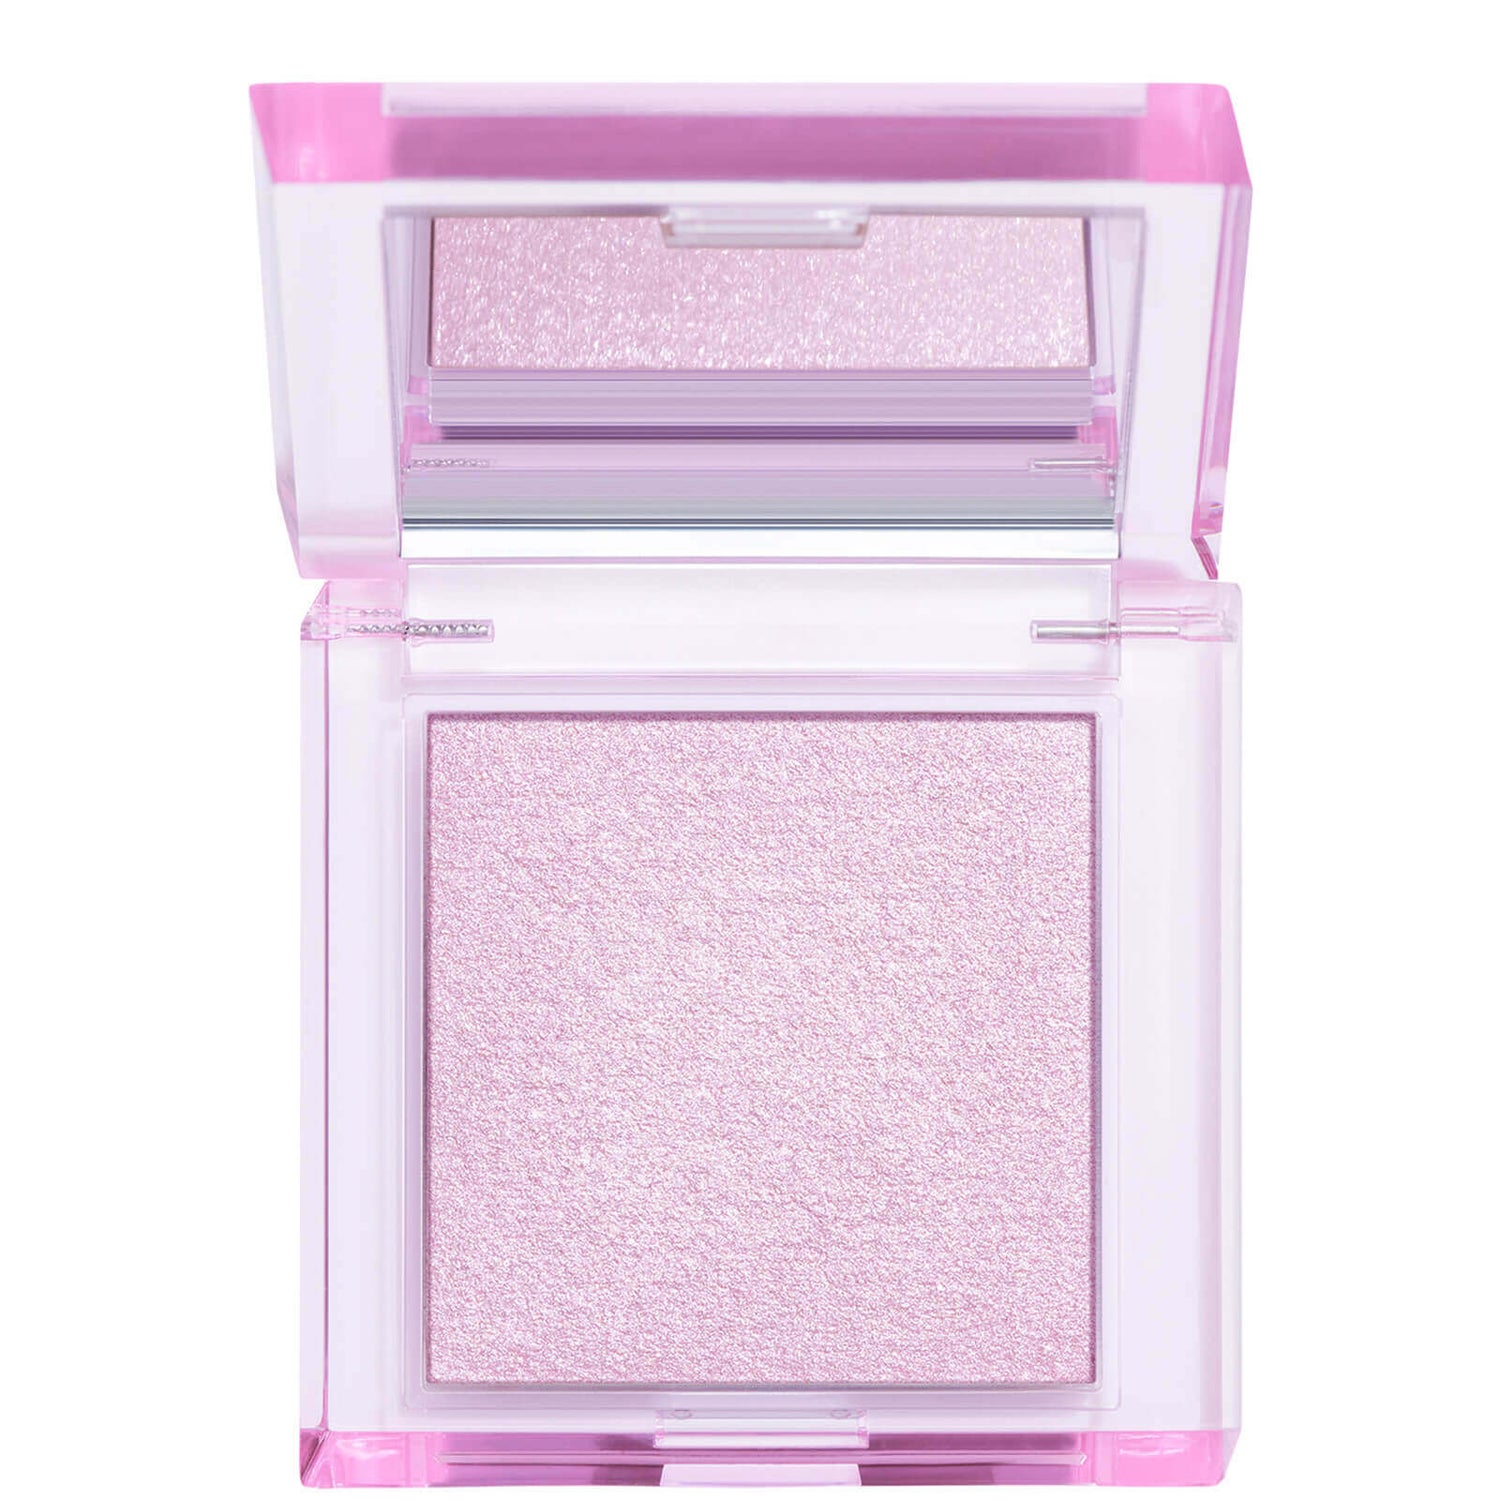 about-face Light Lock Powder 8g (Various Shades)